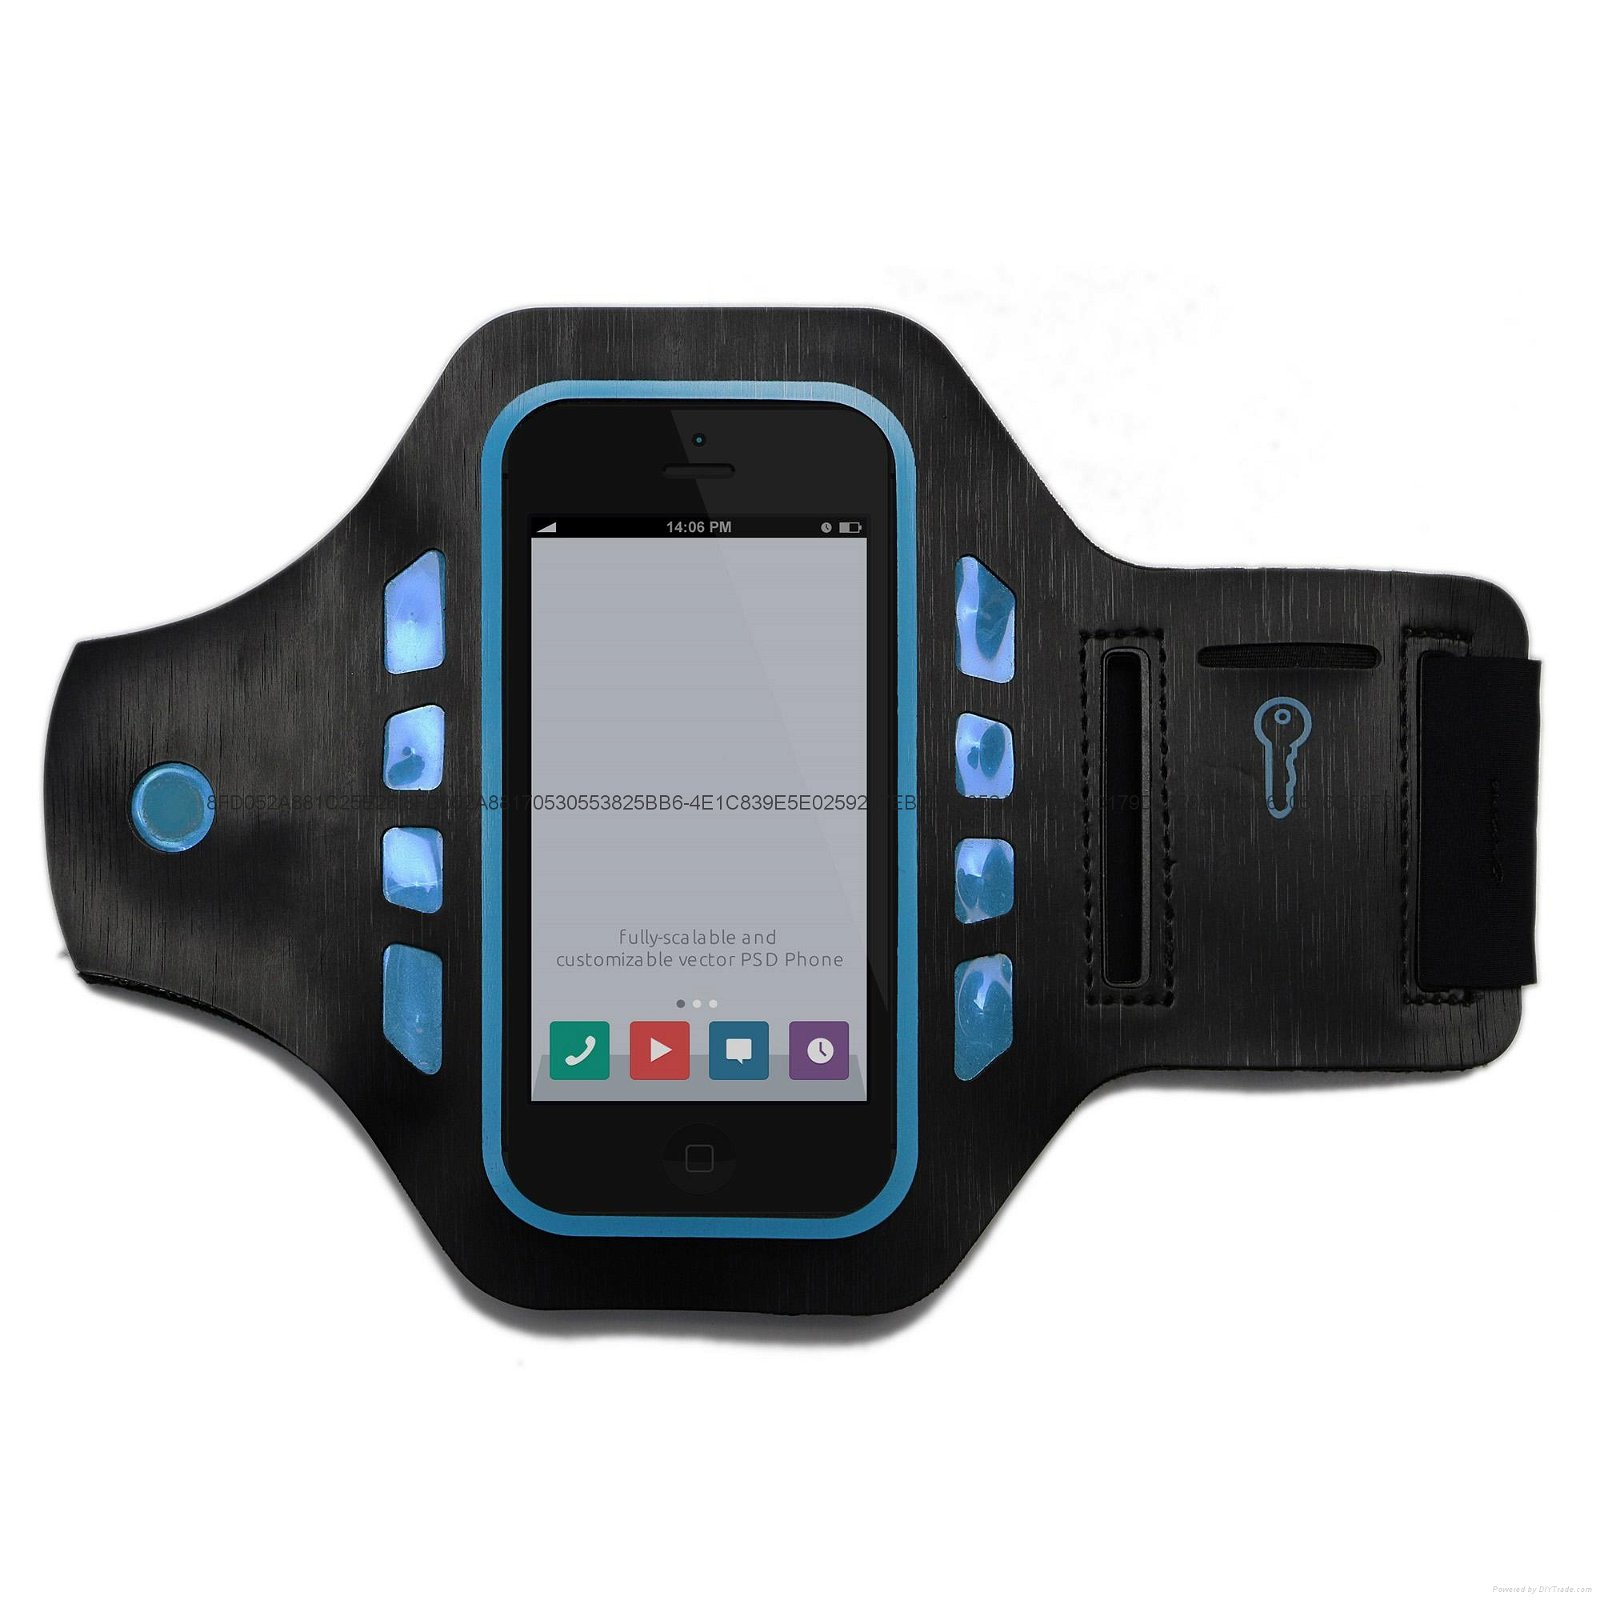 LED safety sports armband, any customized designs and sizes accepted